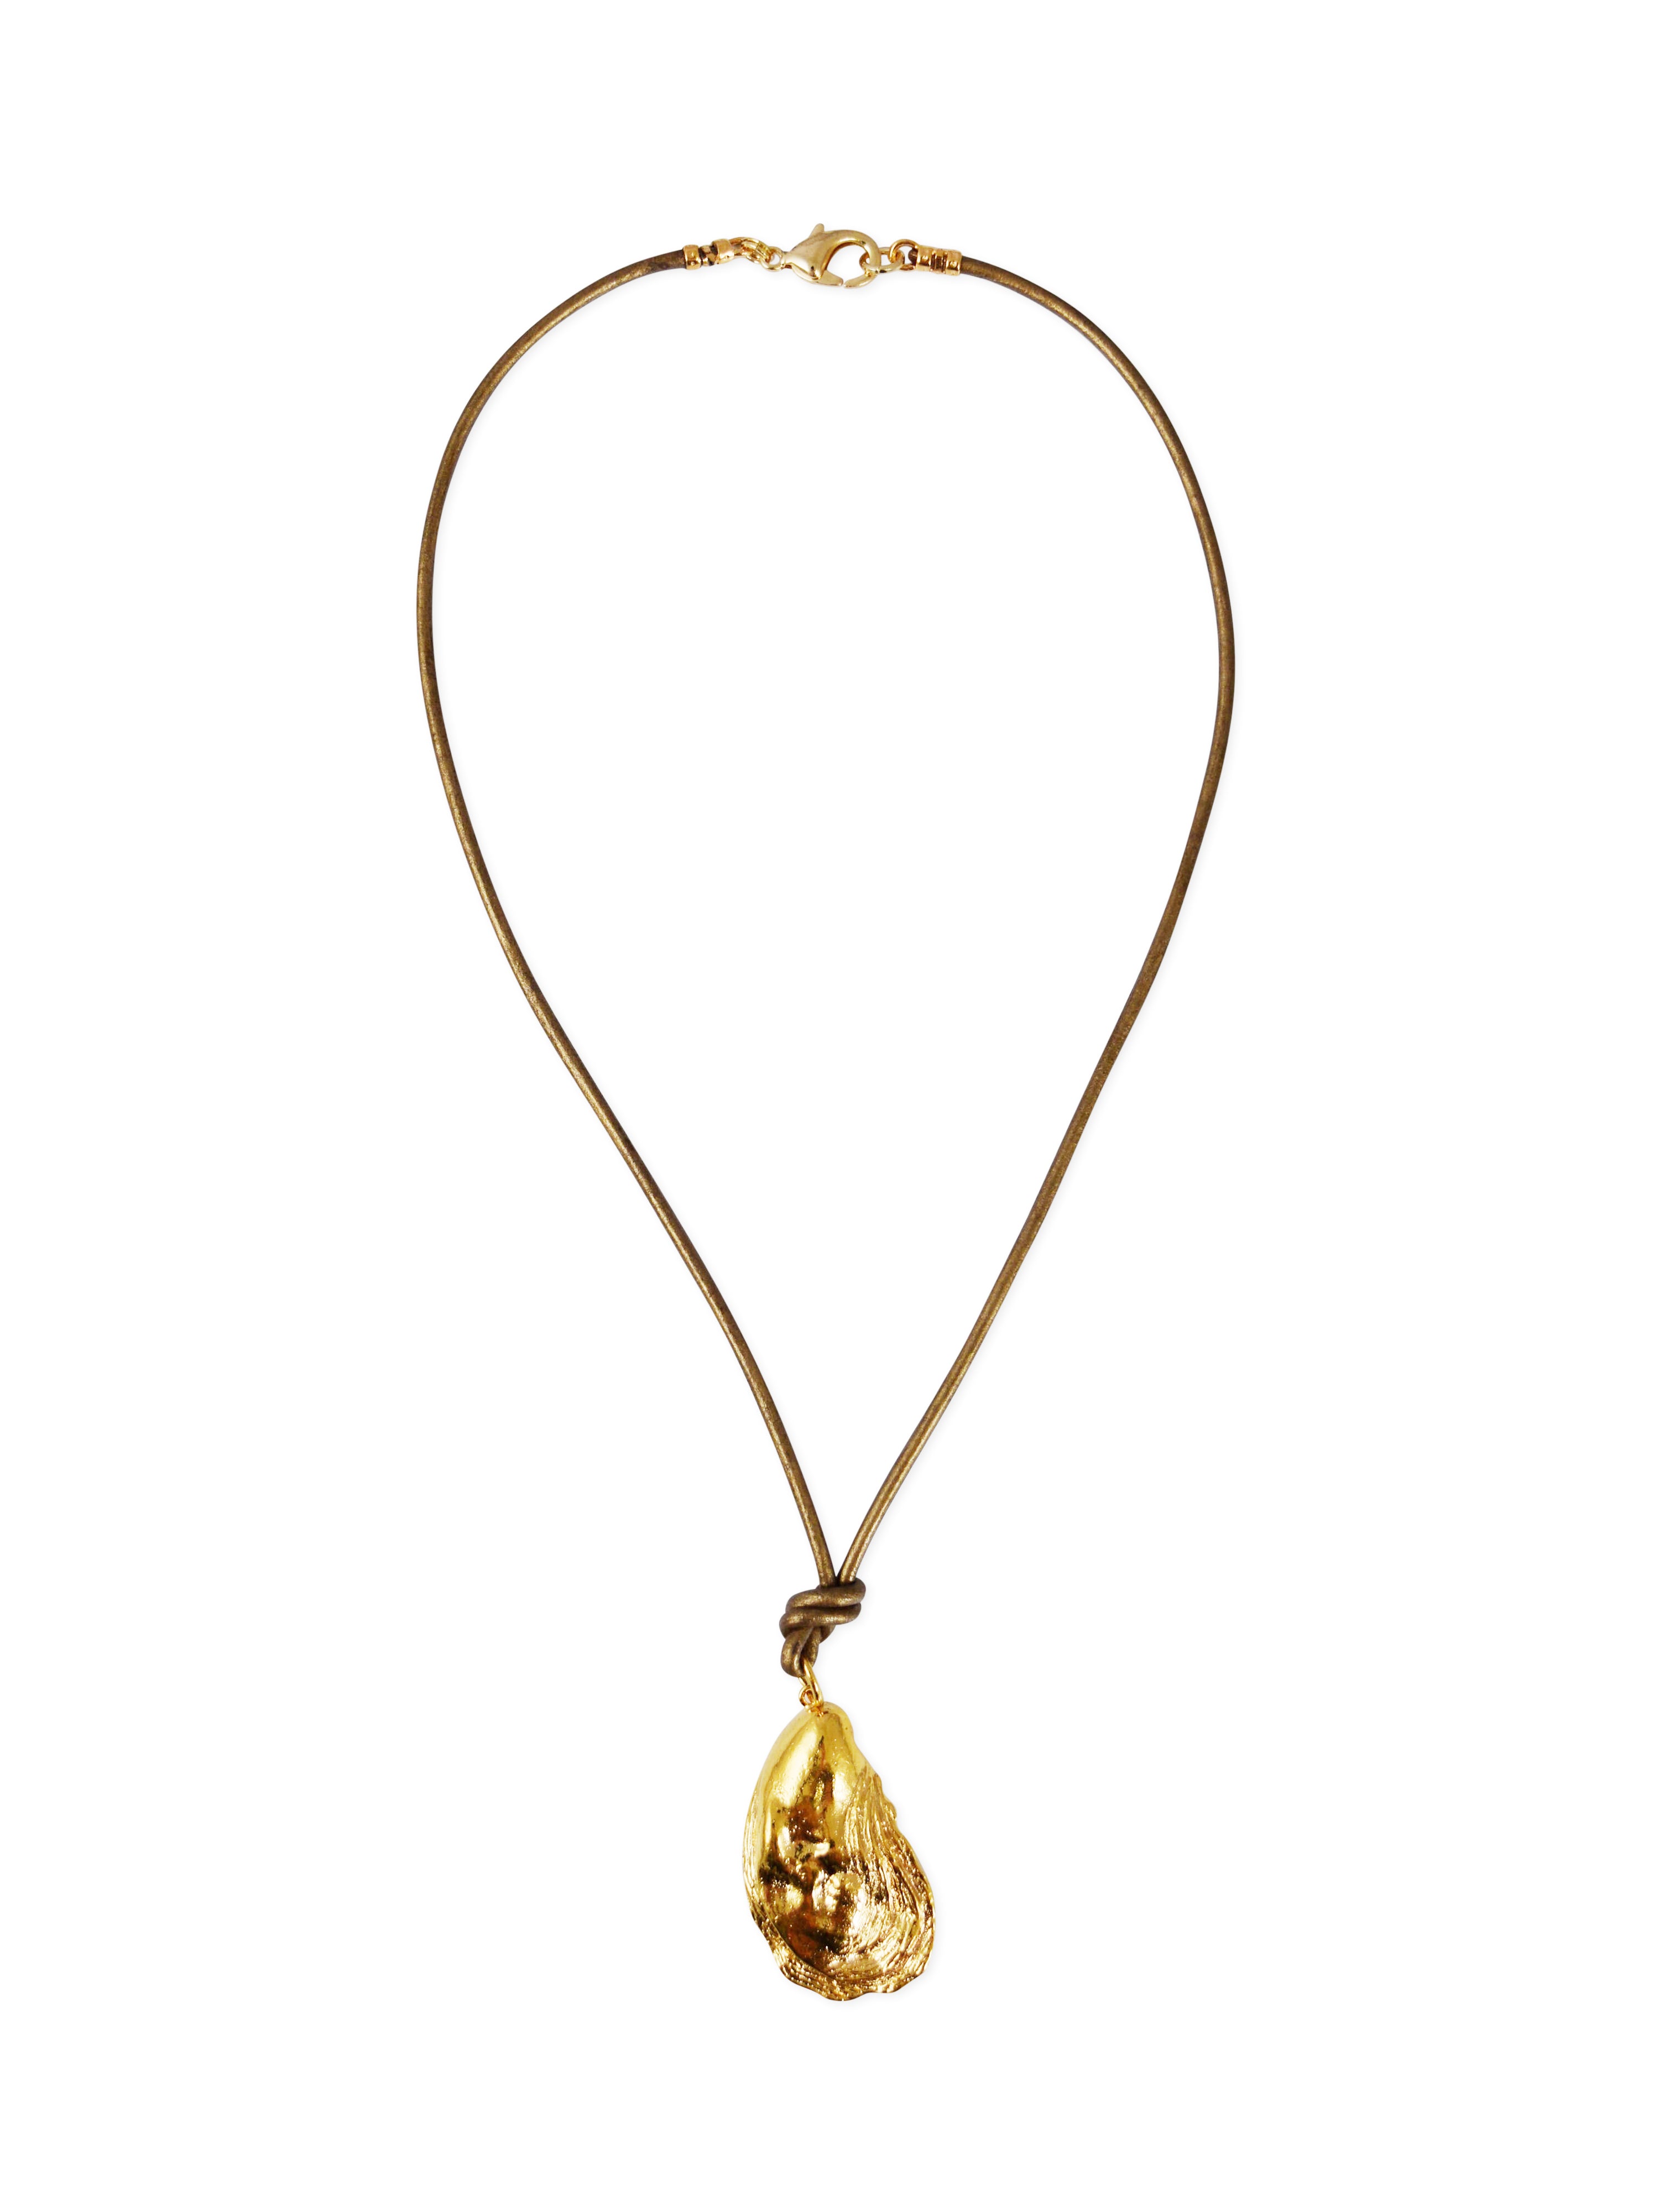 Santee Necklace in Gold